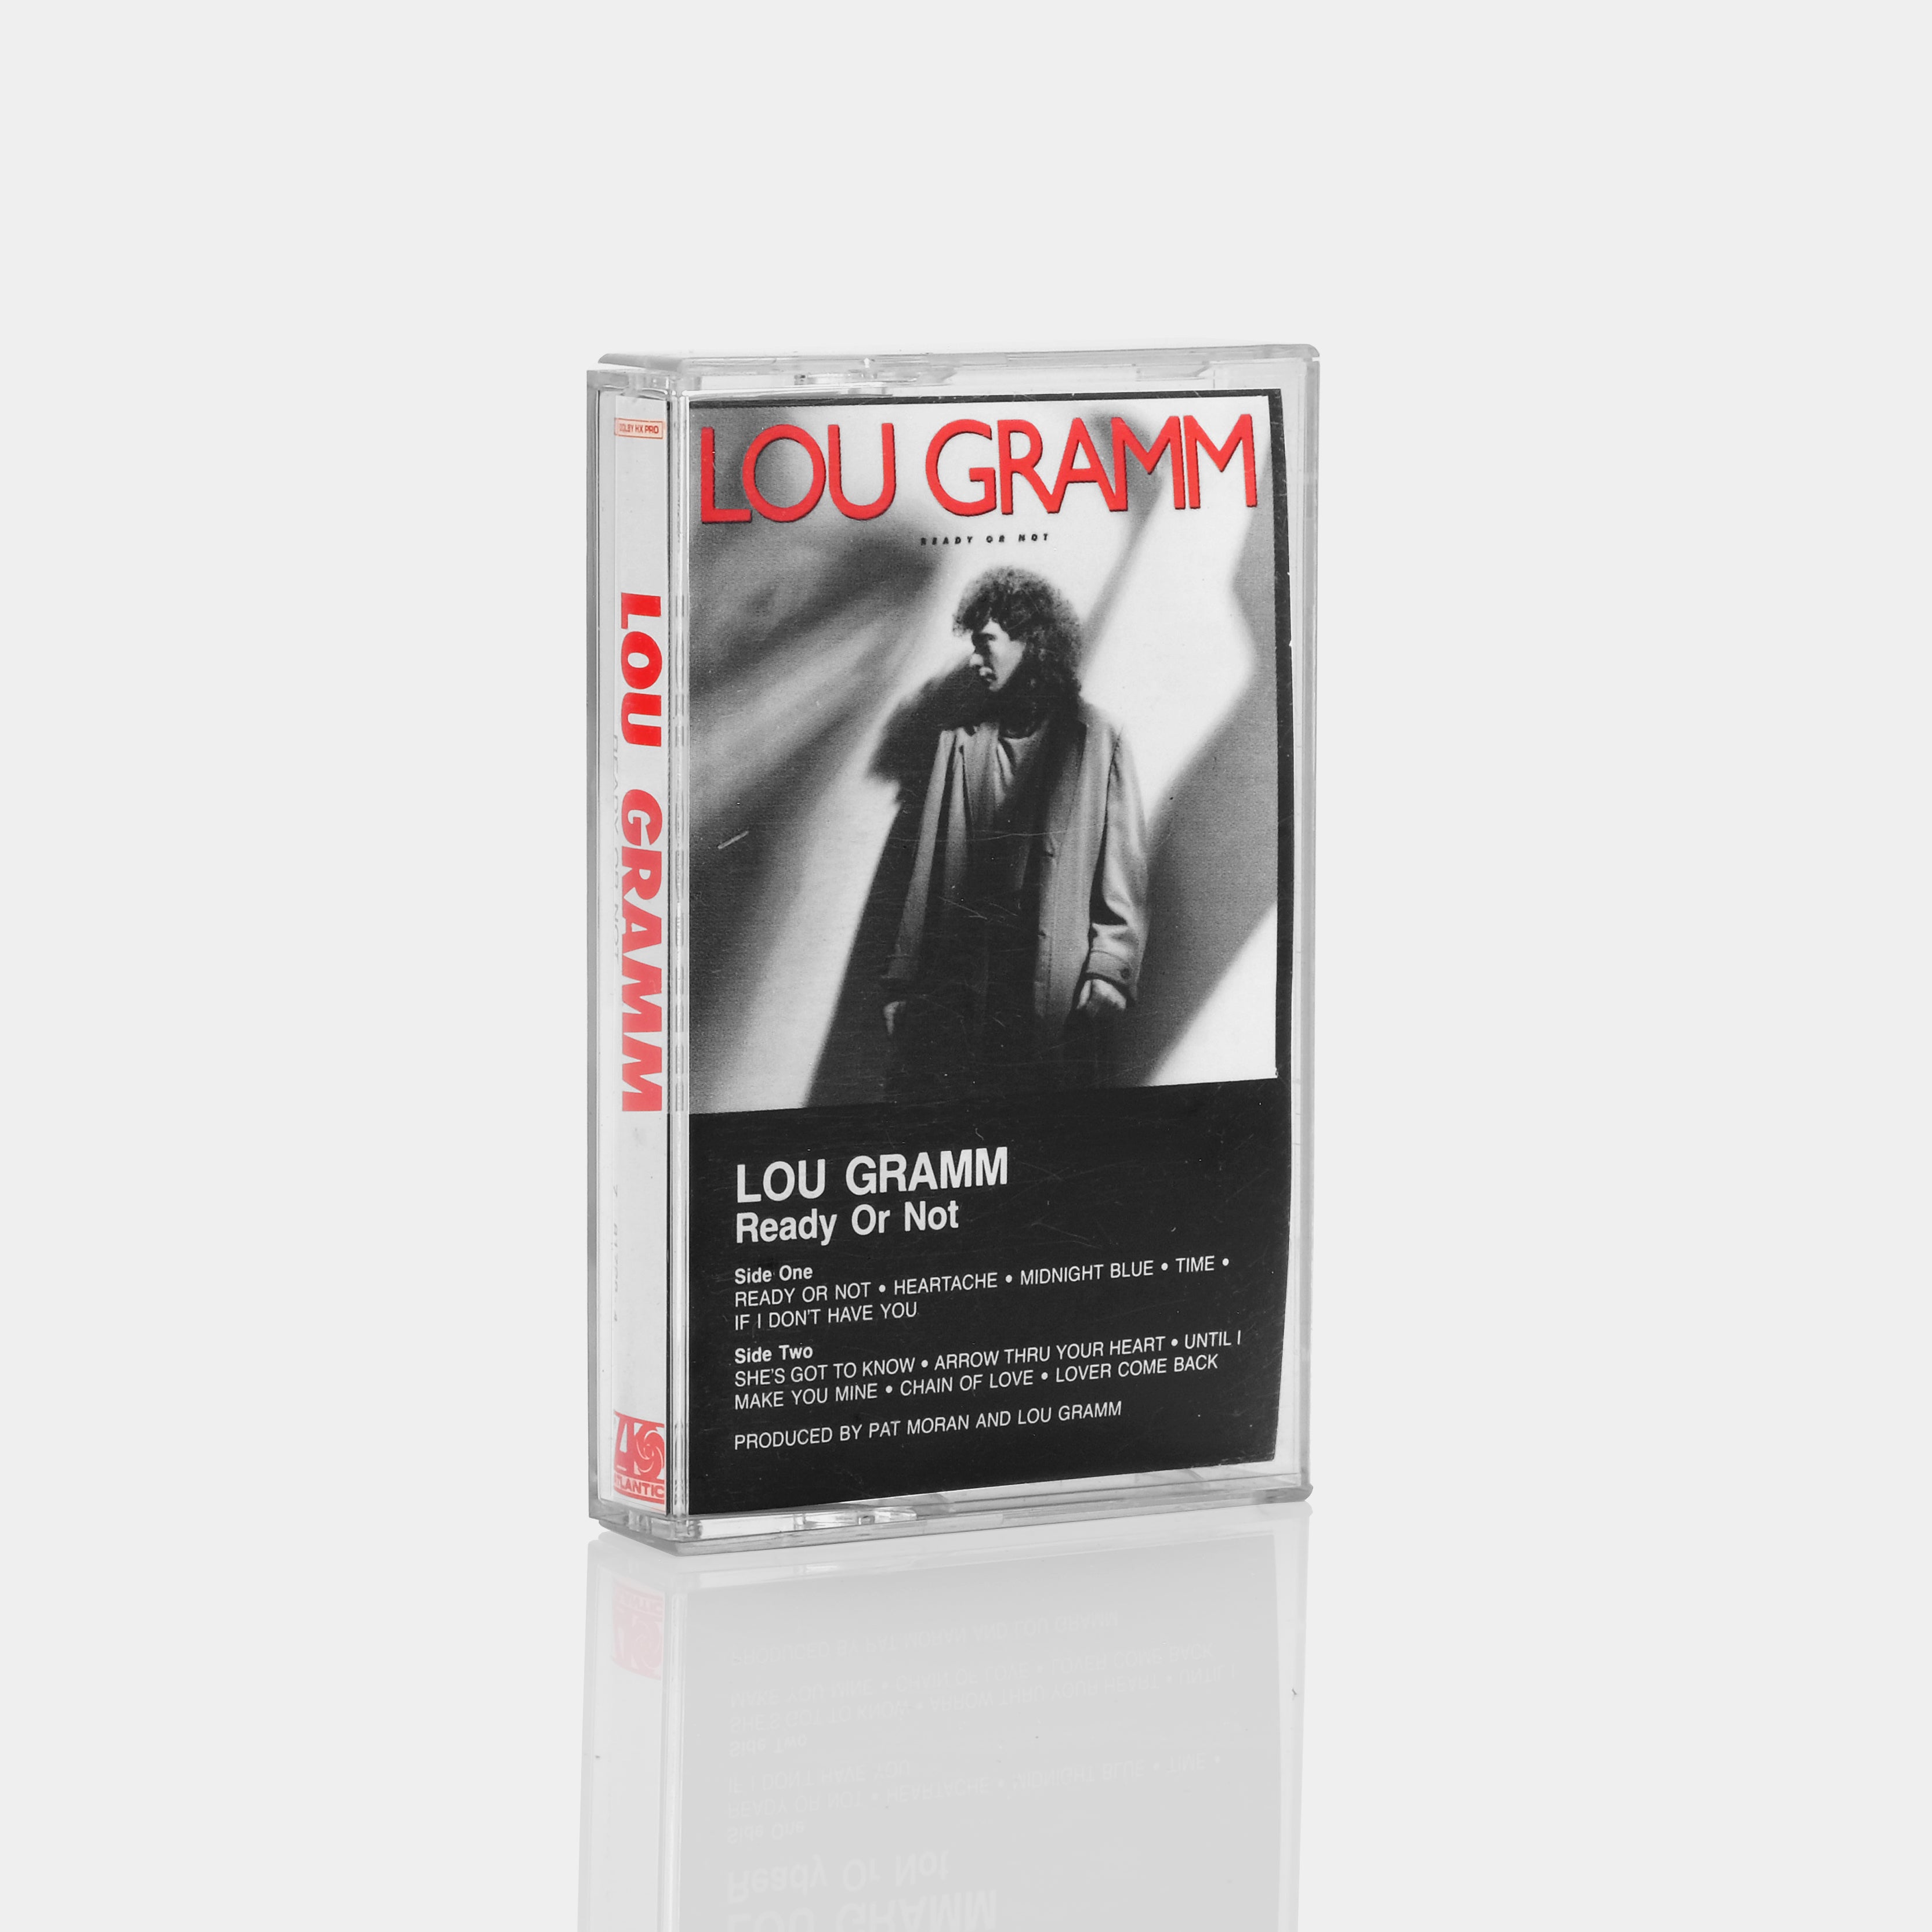 Lou Gramm - Ready Or Not Cassette Tape